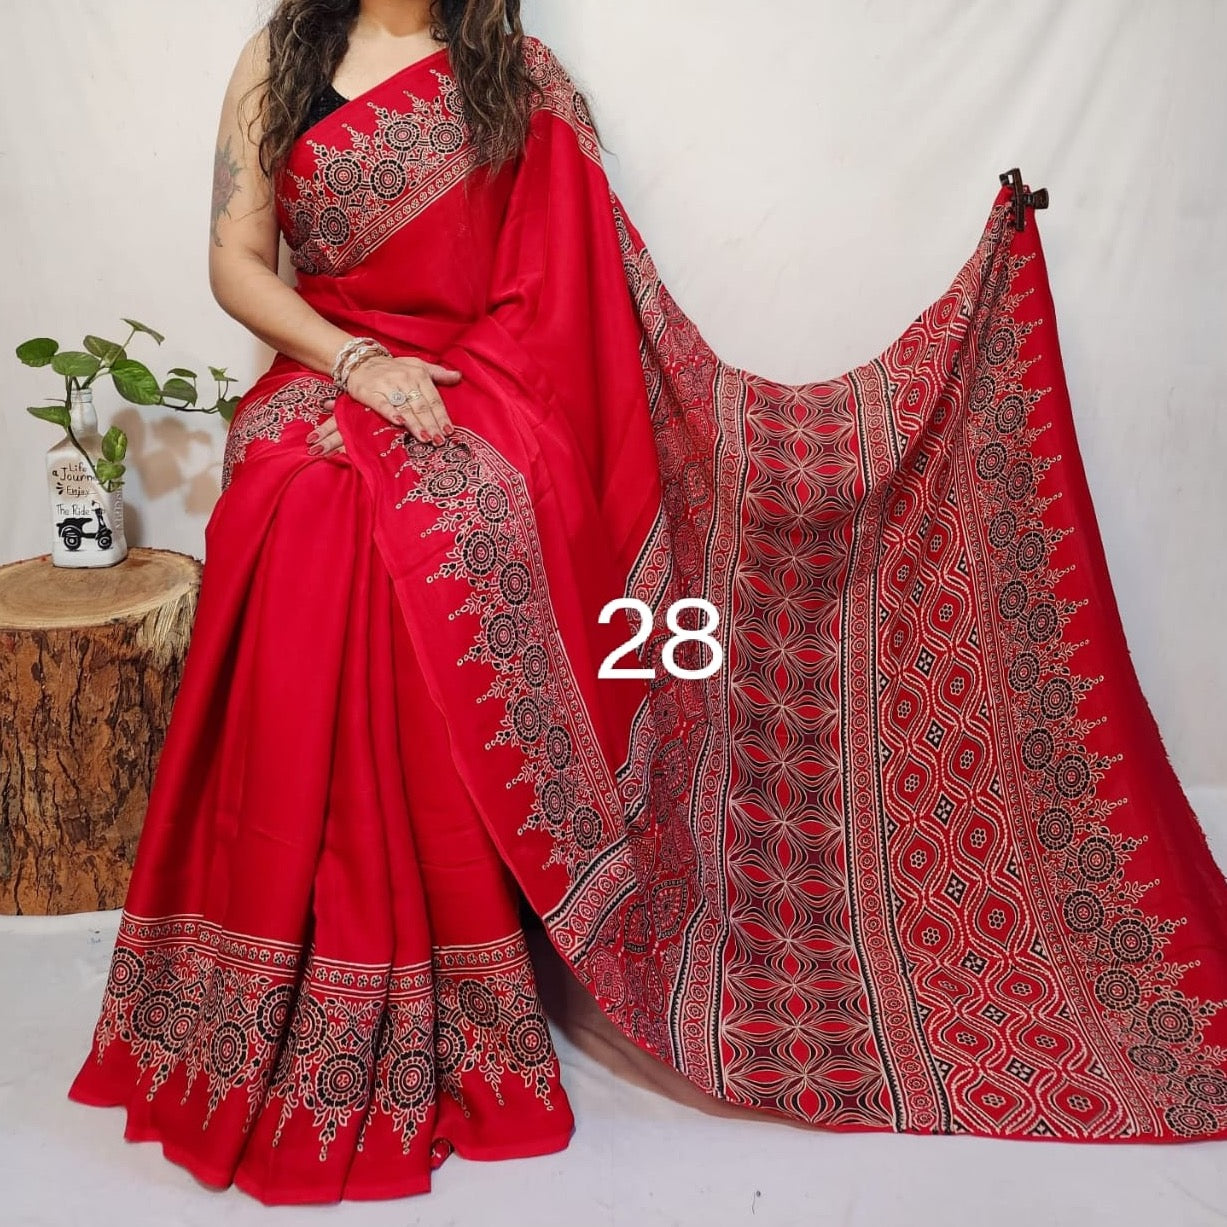 Modal Silk Ajrakh Saree With Natural Dyes - Black, Maroon, Red, Yellow